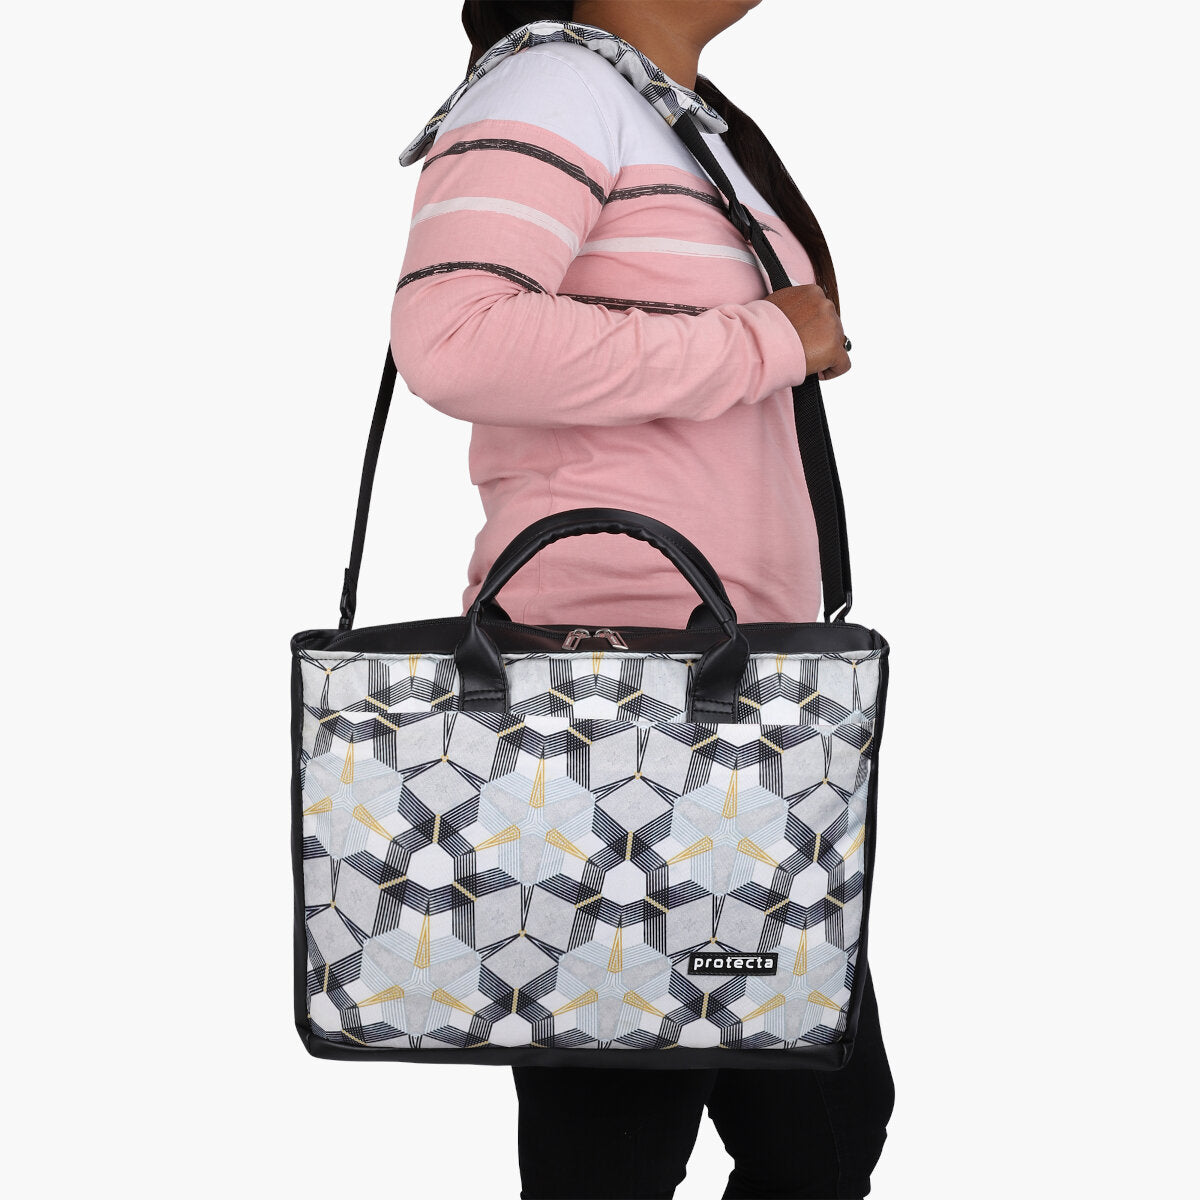 Compass Print | Protecta Evenly Poised Office Laptop Bag for Women - 7